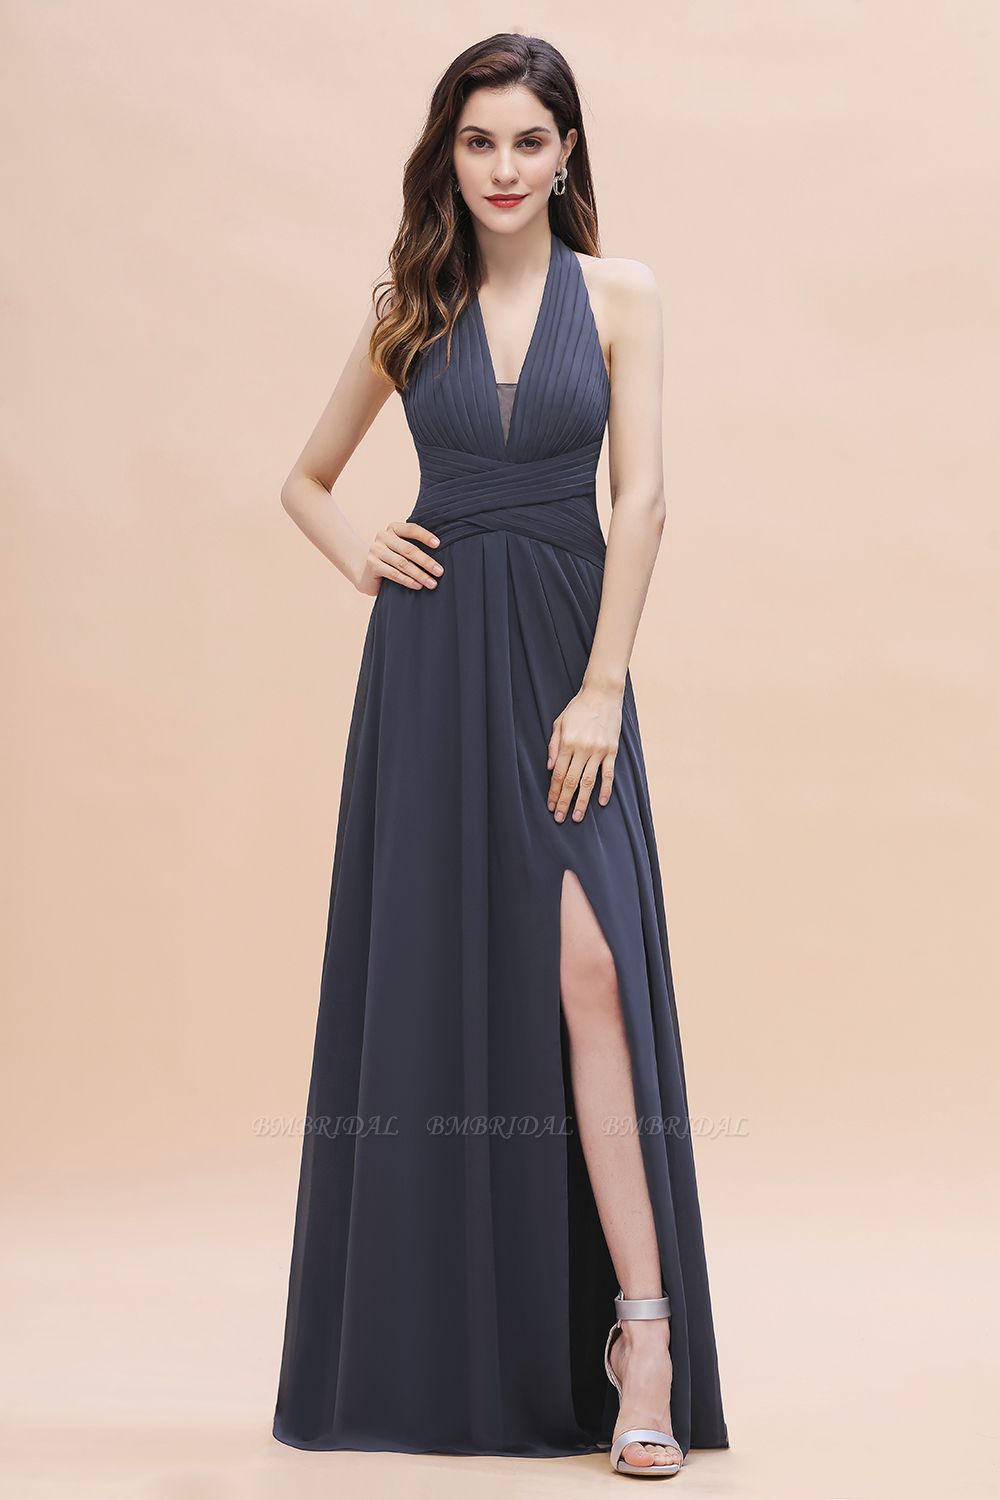 BMbridal Gorgeous Halter Chiffon Ruffles Bridesmaid Dress with Front Slit Online